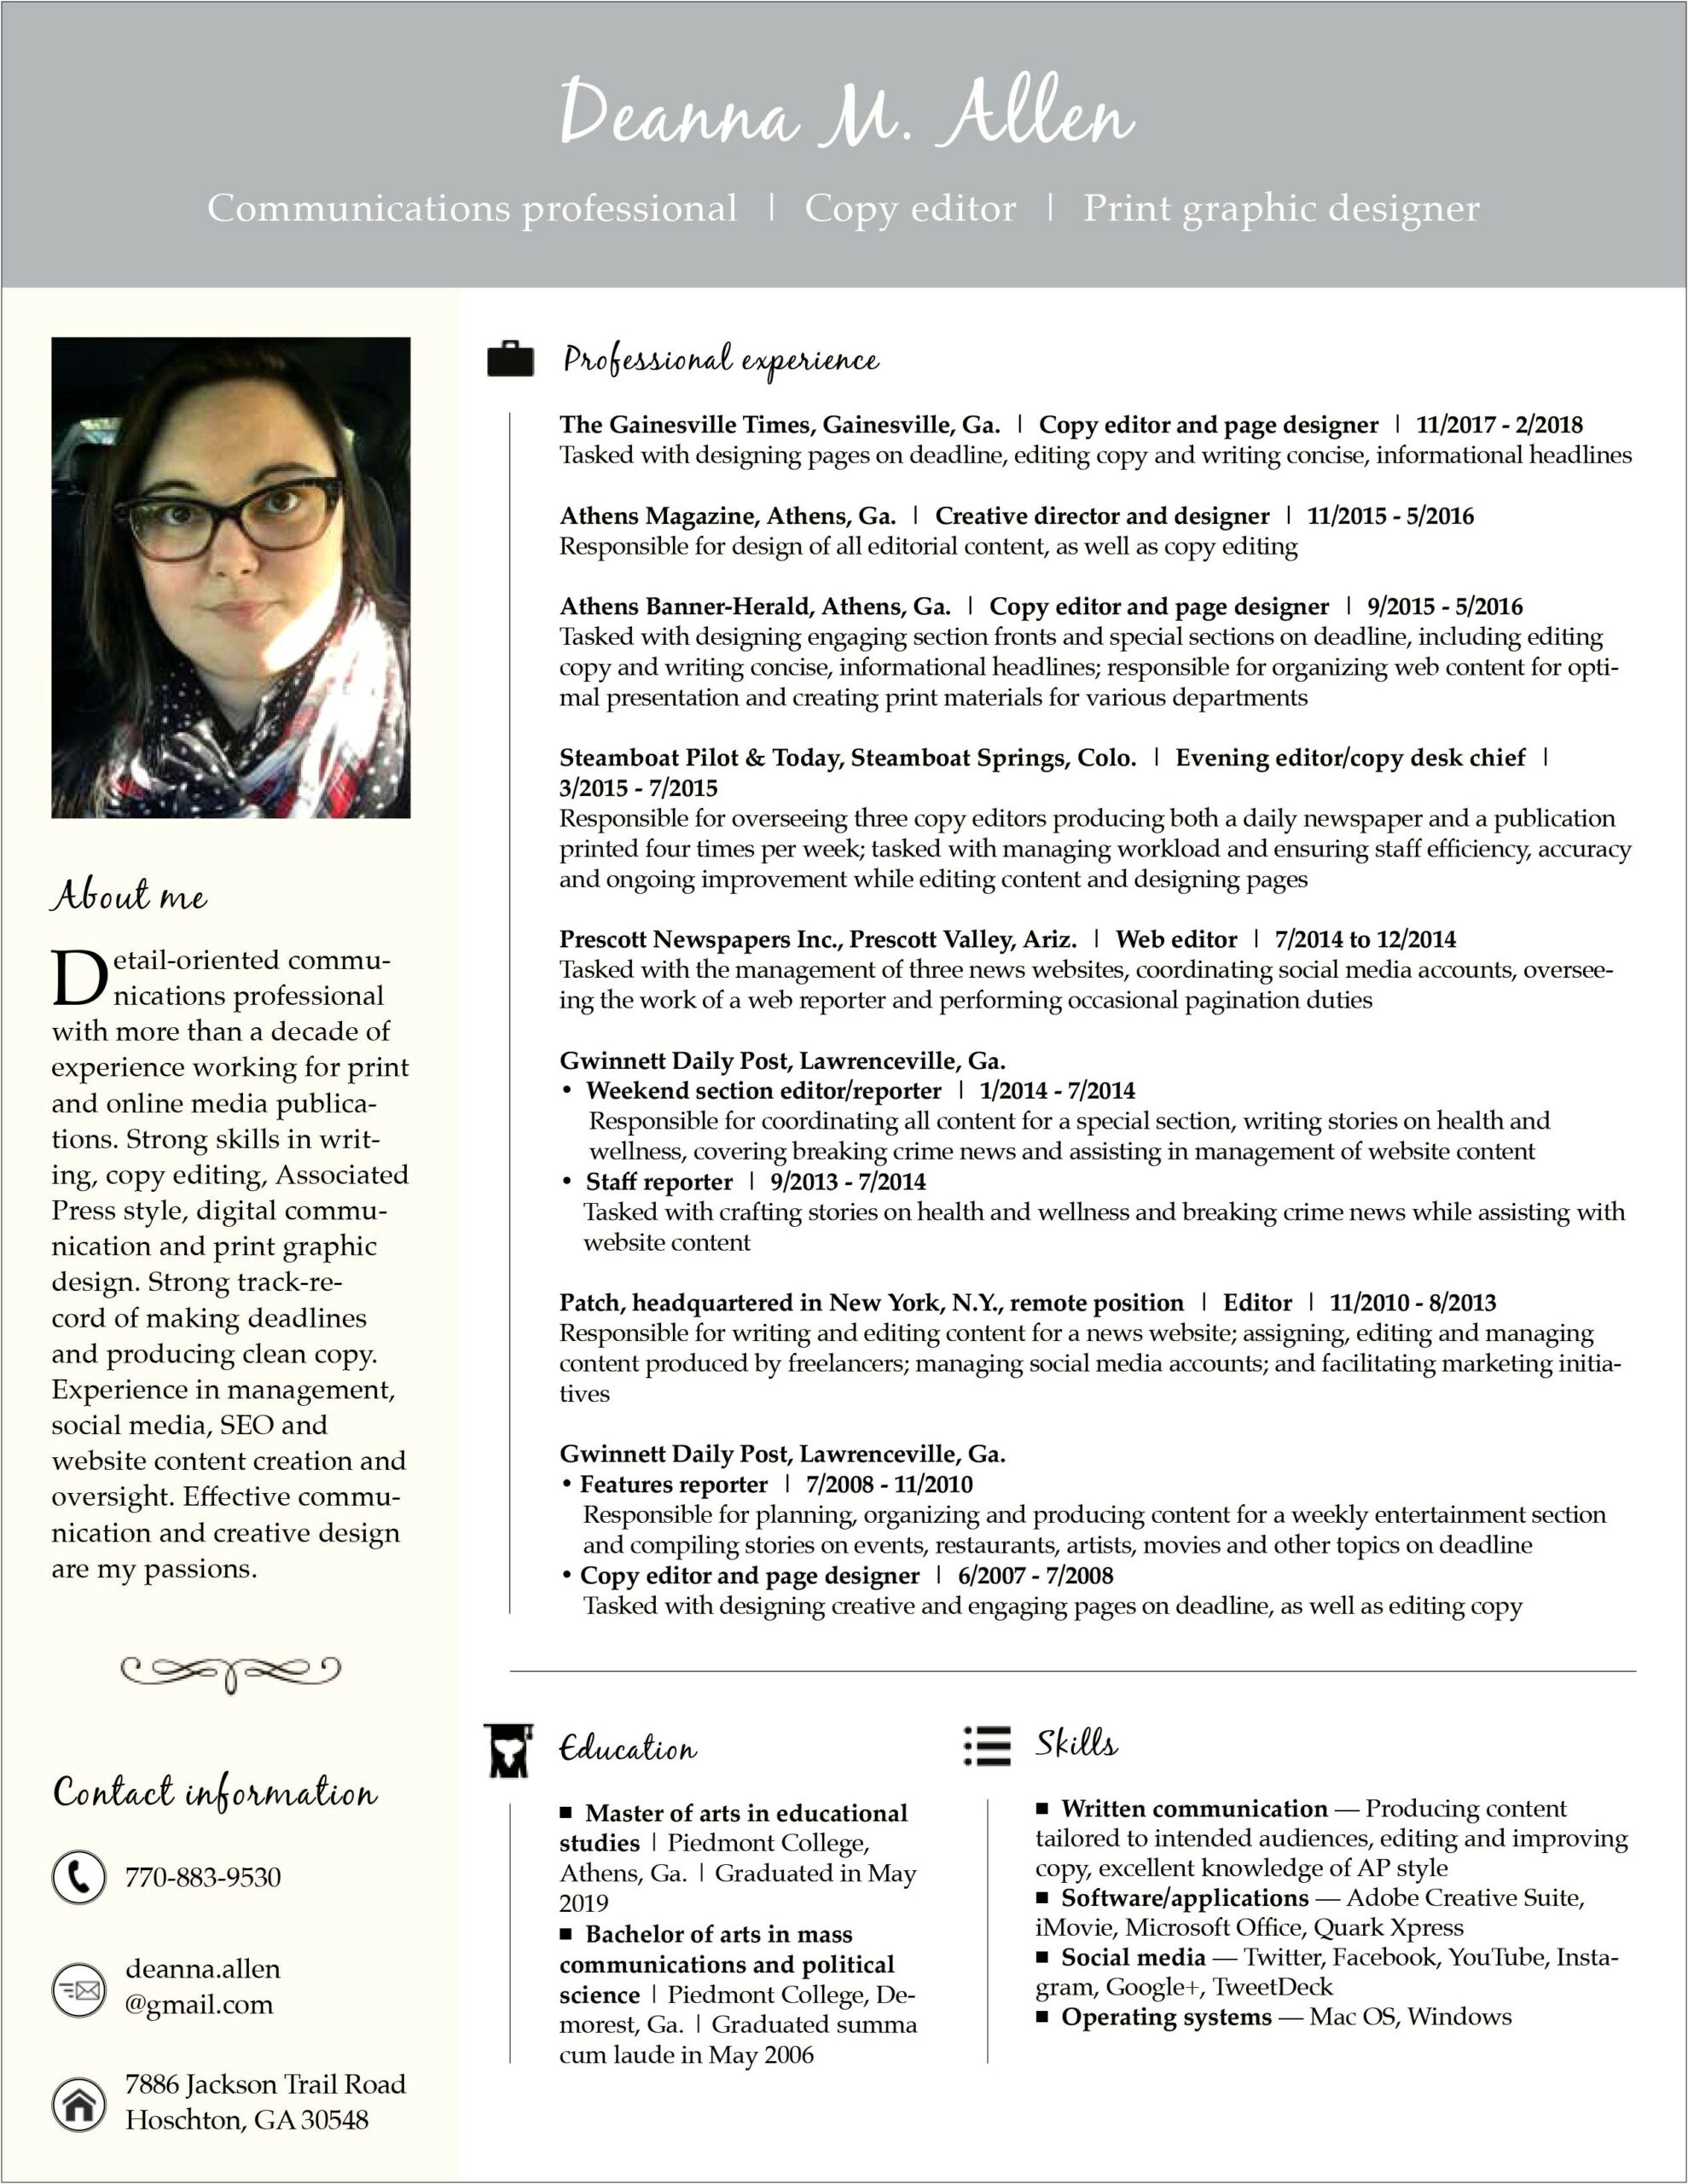 Best Resume Writings For Creative Director